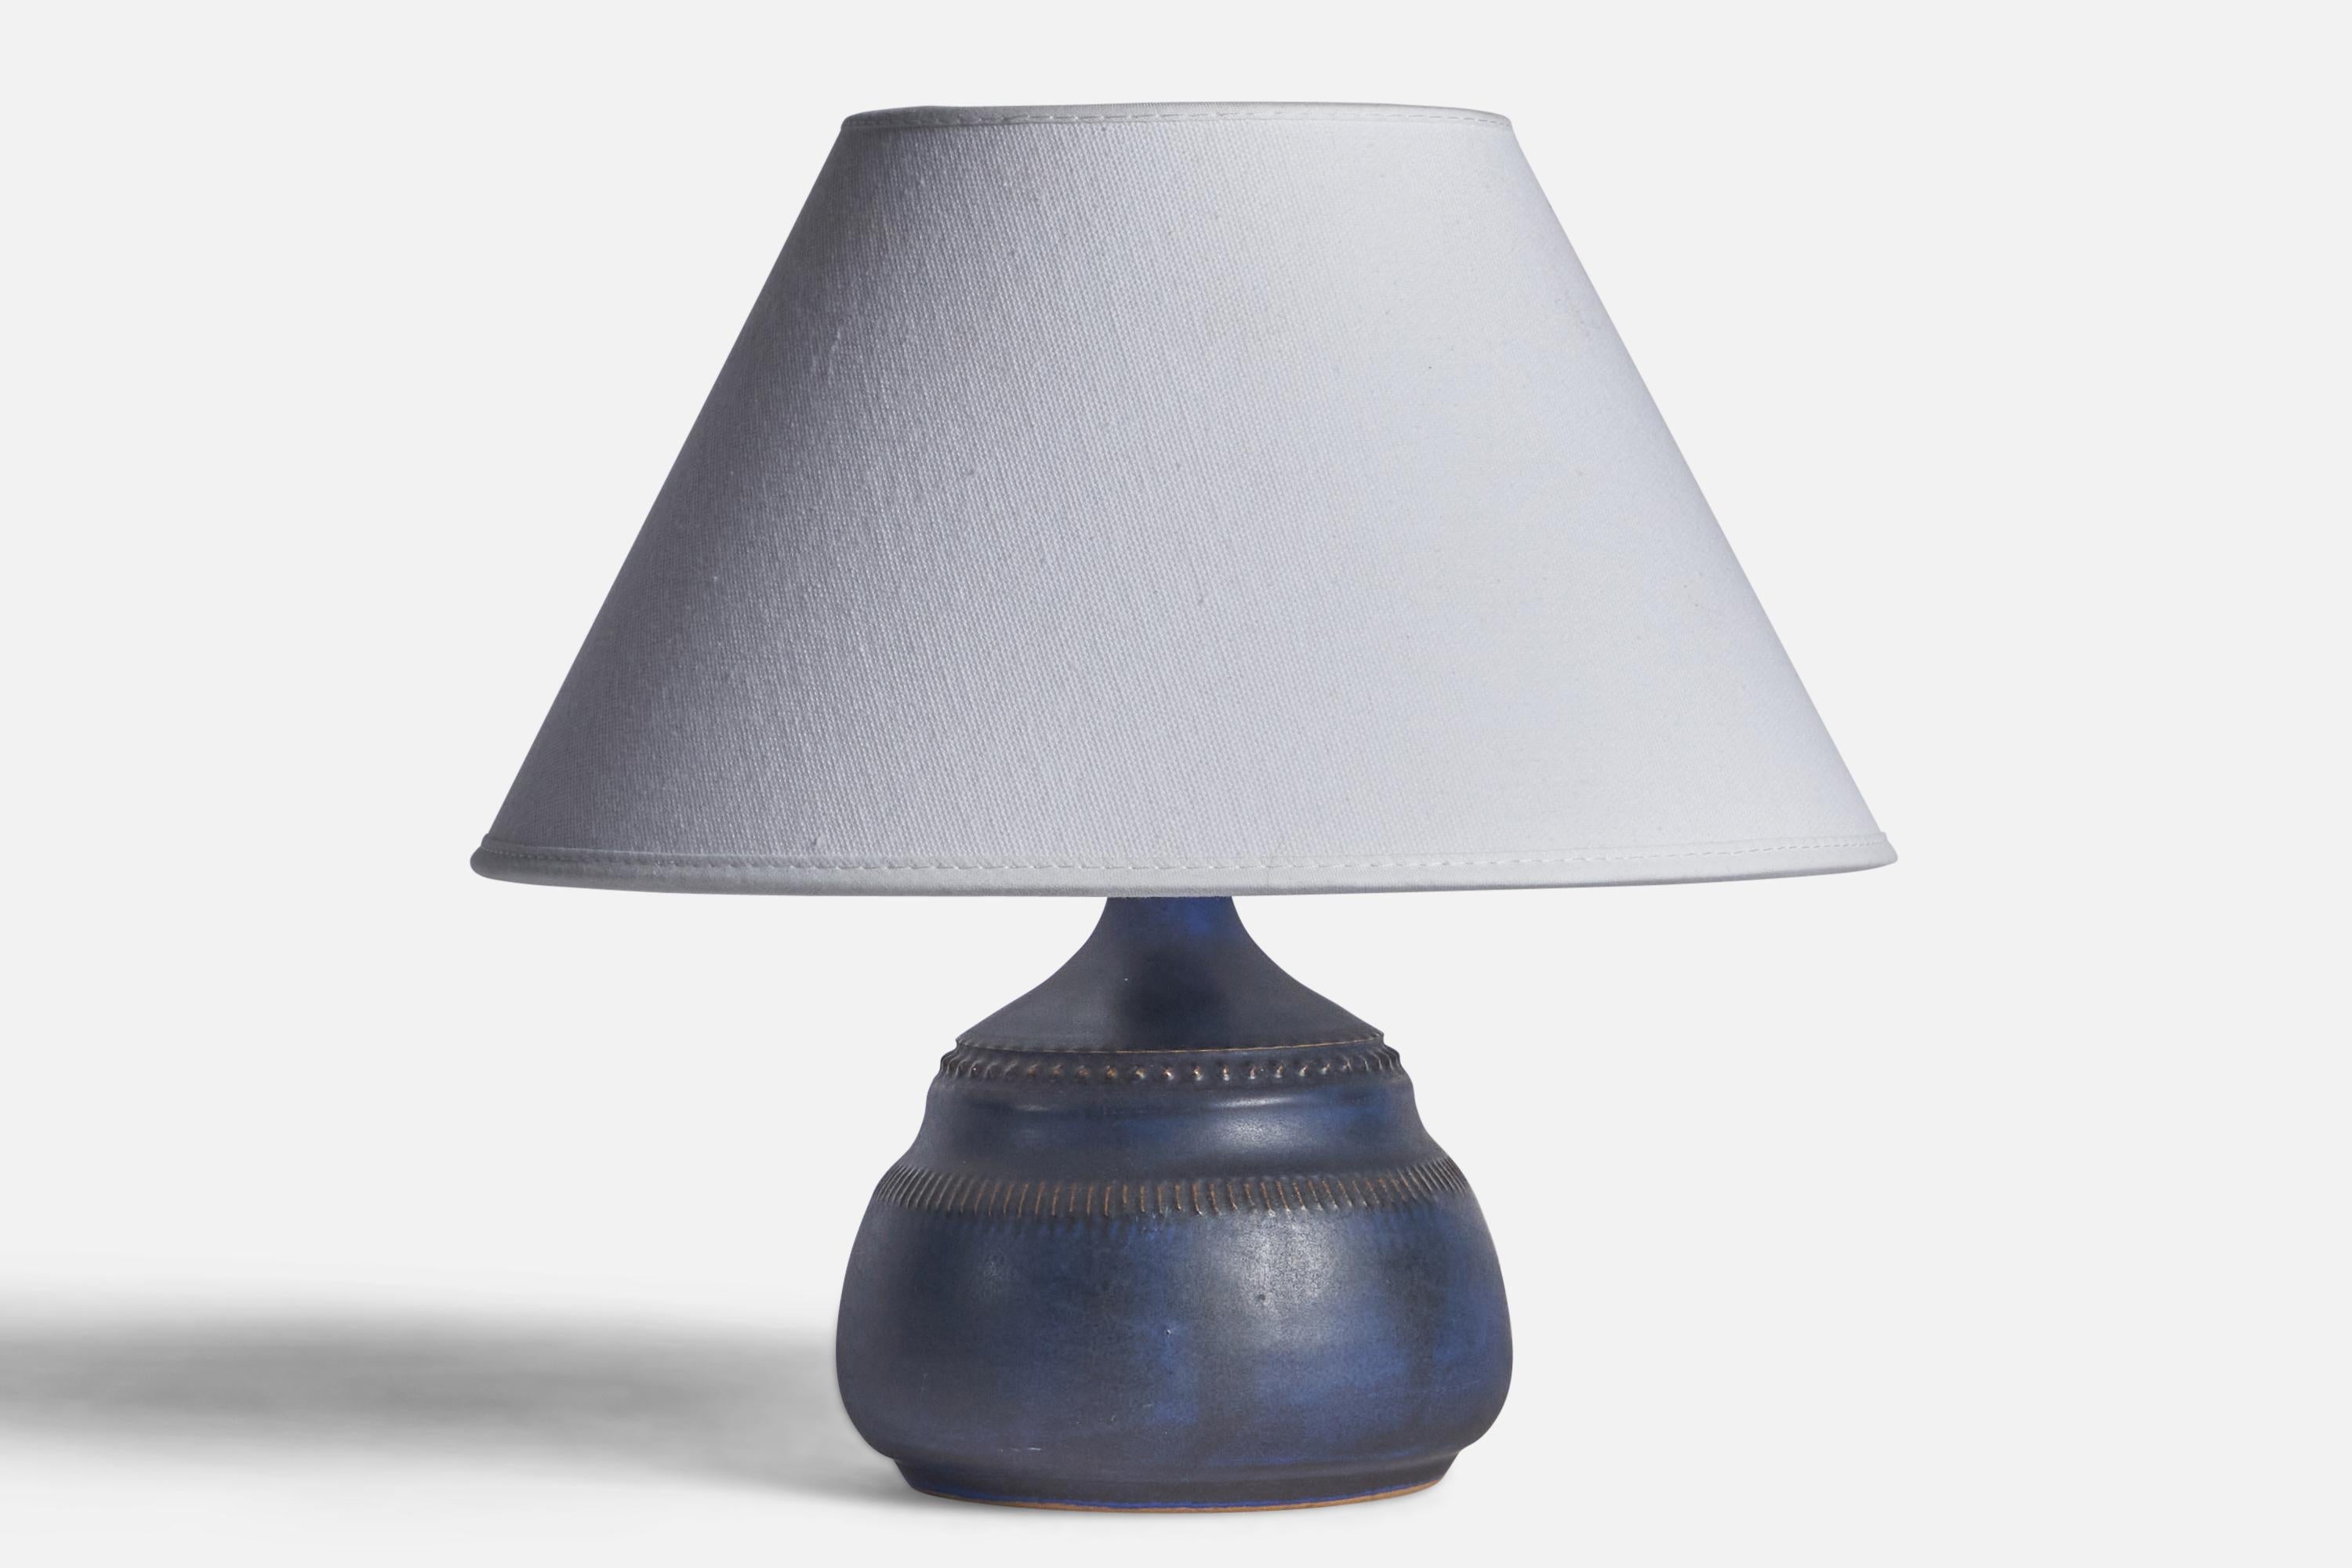 A blue-glazed and incised stoneware table lamp designed and produced by Klase Höganäs, Sweden, 1960s.

Dimensions of Lamp (inches): 7.75” H x 4.55” Diameter
Dimensions of Shade (inches): 7” Top Diameter x 10” Bottom Diameter x 5.5” H 
Dimensions of